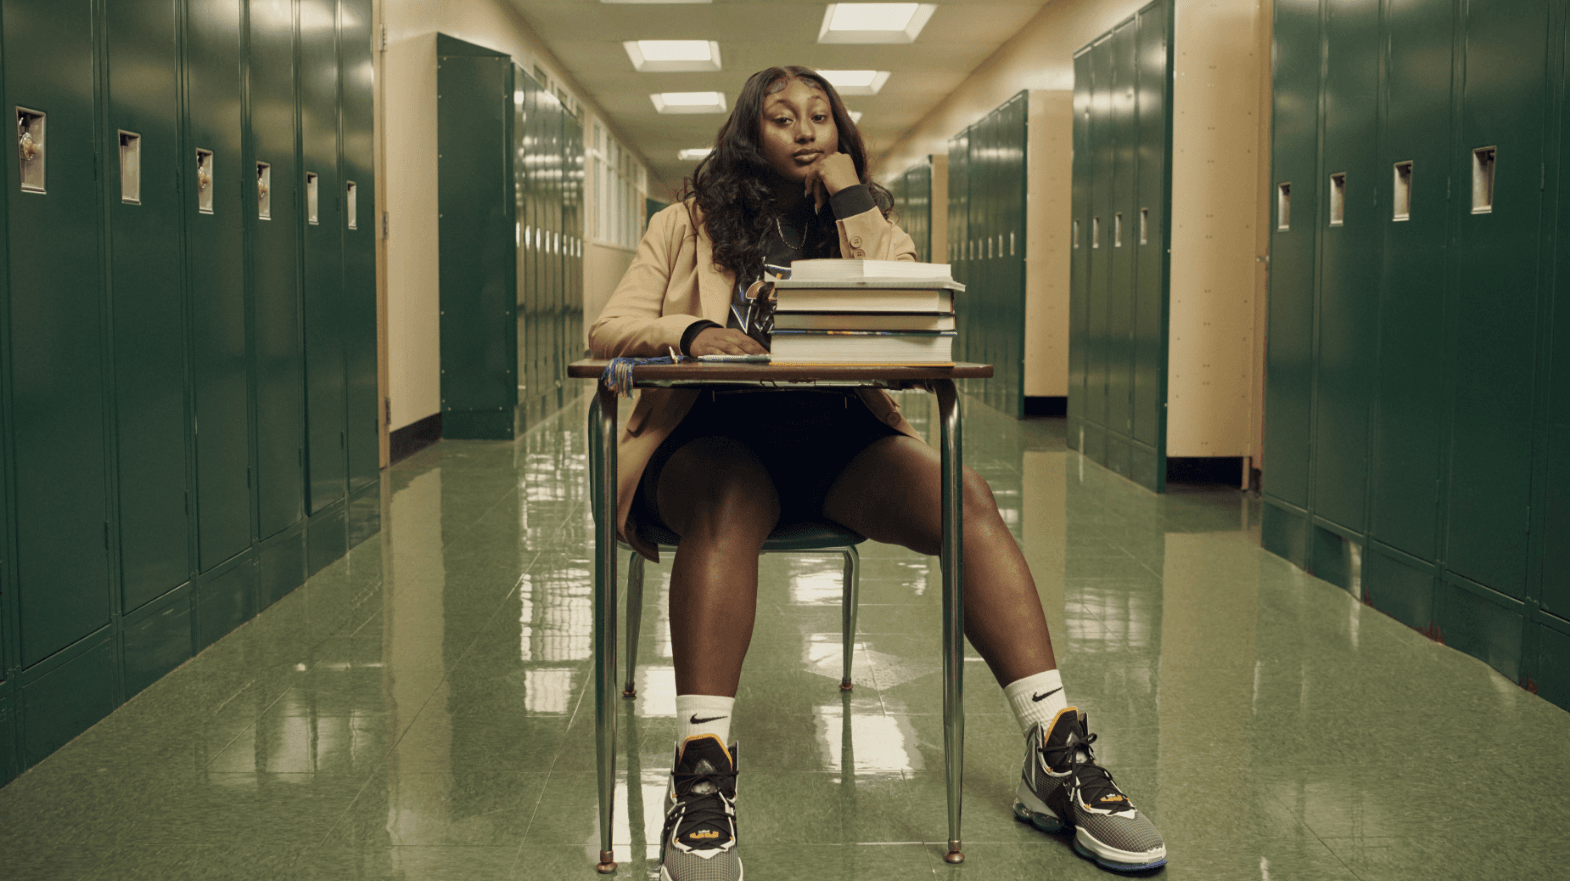 Girl sitting at school desk that has school books stacked on it. Desk is in a school hallway with lockers lining the walls. Girl is wearing Nike LeBron XIX shoes